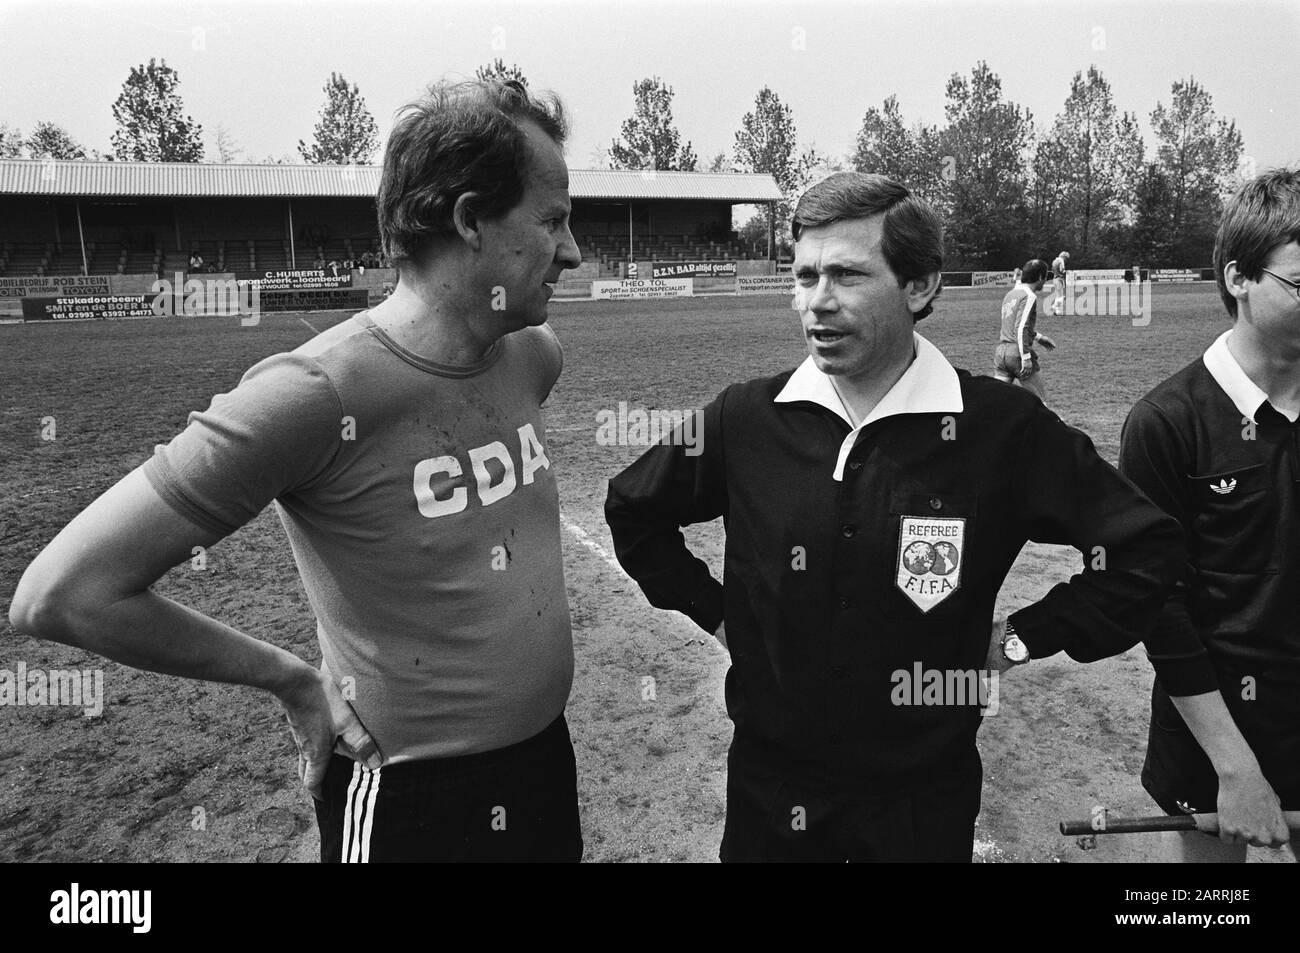 Football match between CDA against artists and broadcasters as election stunt, players for the match Date: May 9, 1981 Keywords: ARTISTS, broadcasting staff, sports, soccer, etc. matches Institution name: CDA Stock Photo